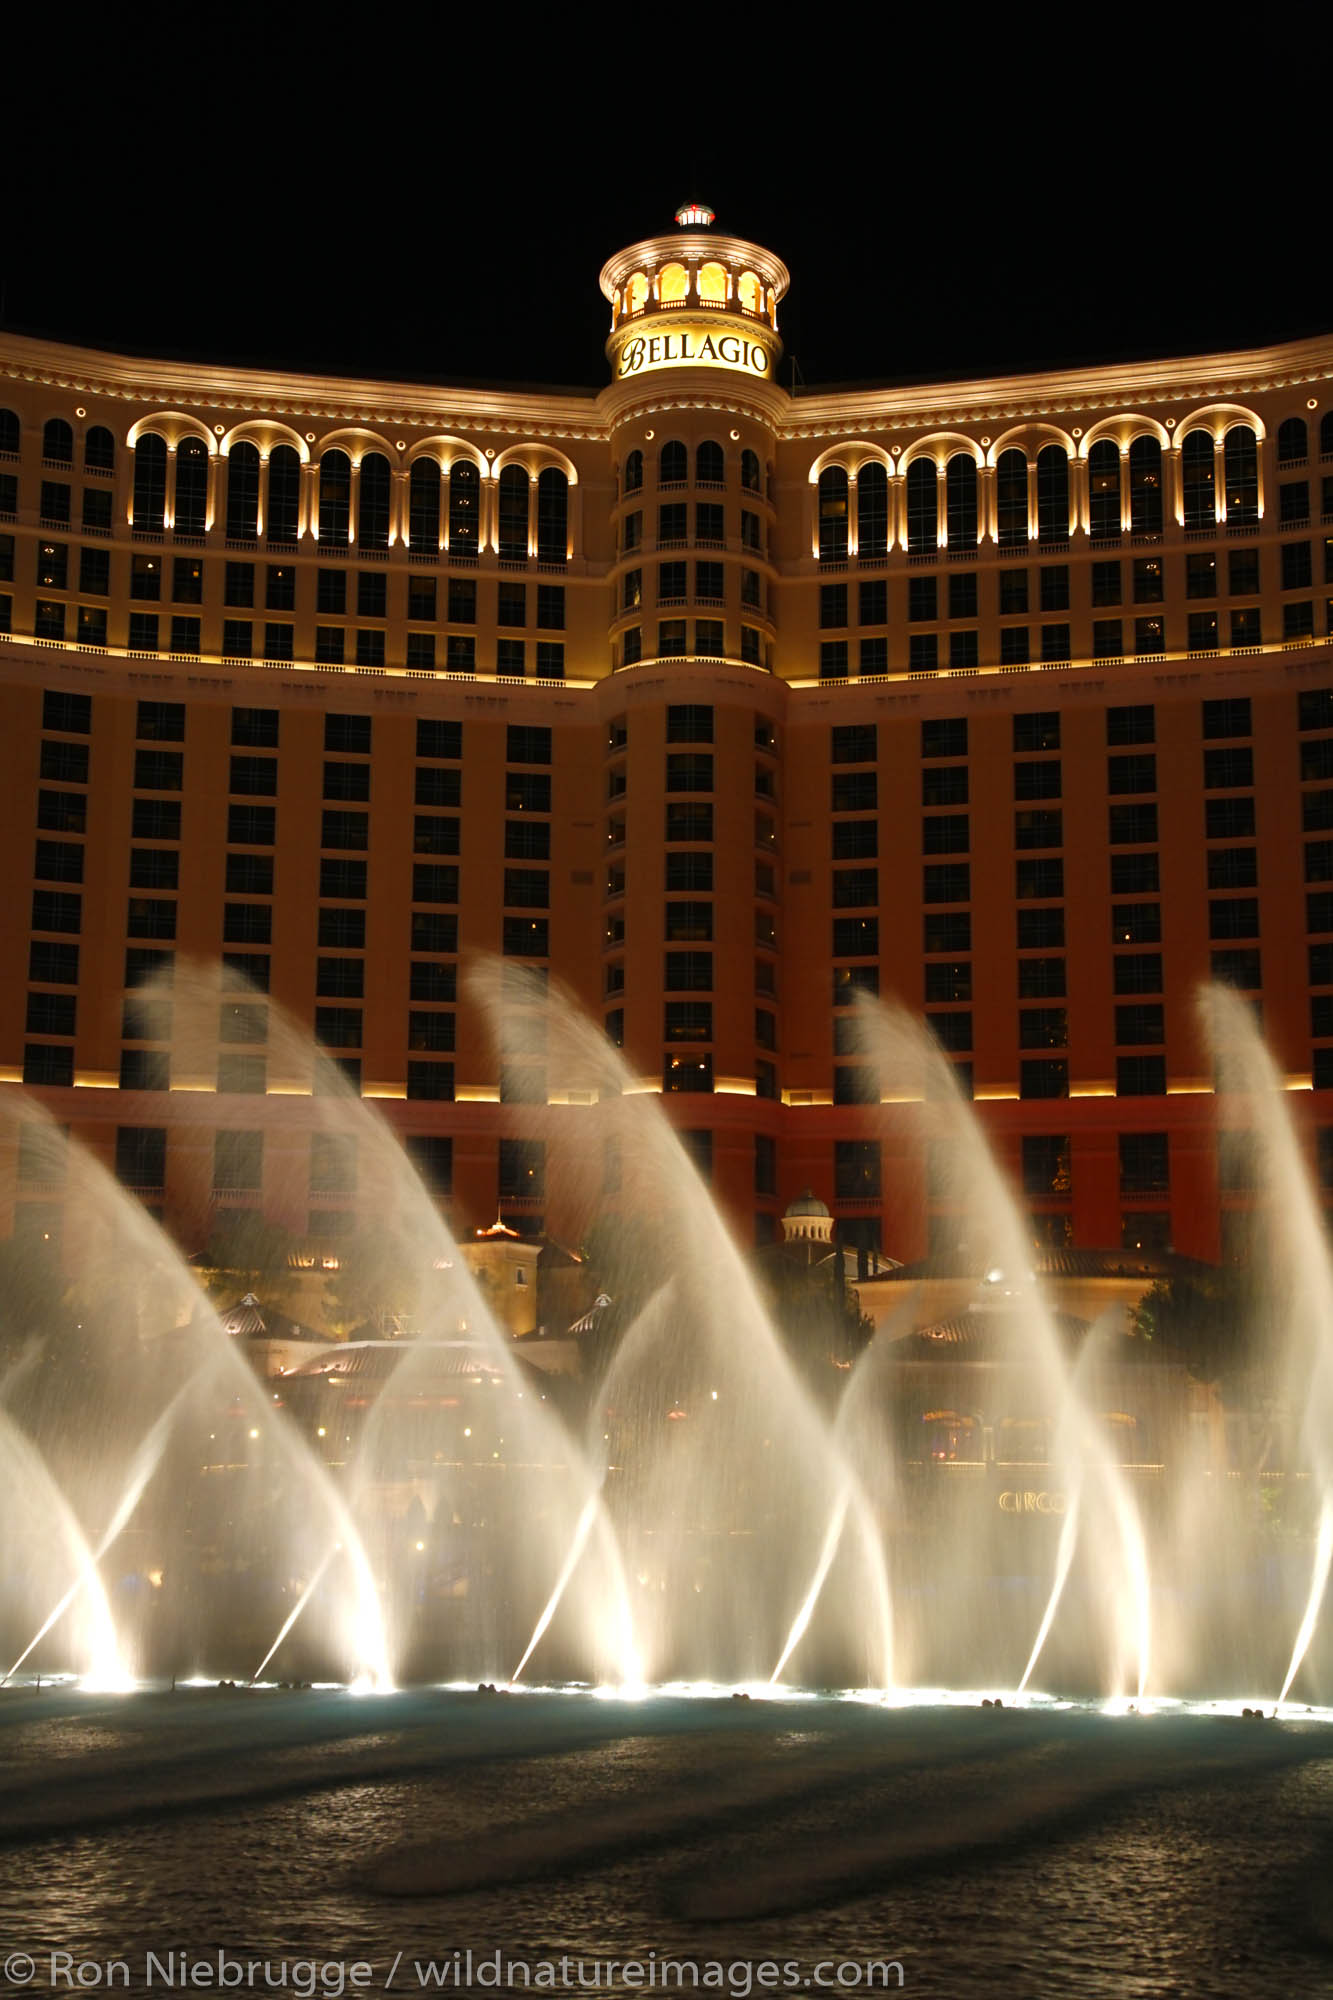 The fountain show in front of Bellagio Hotel and Casino on the Las Vegas Strip, Nevada.